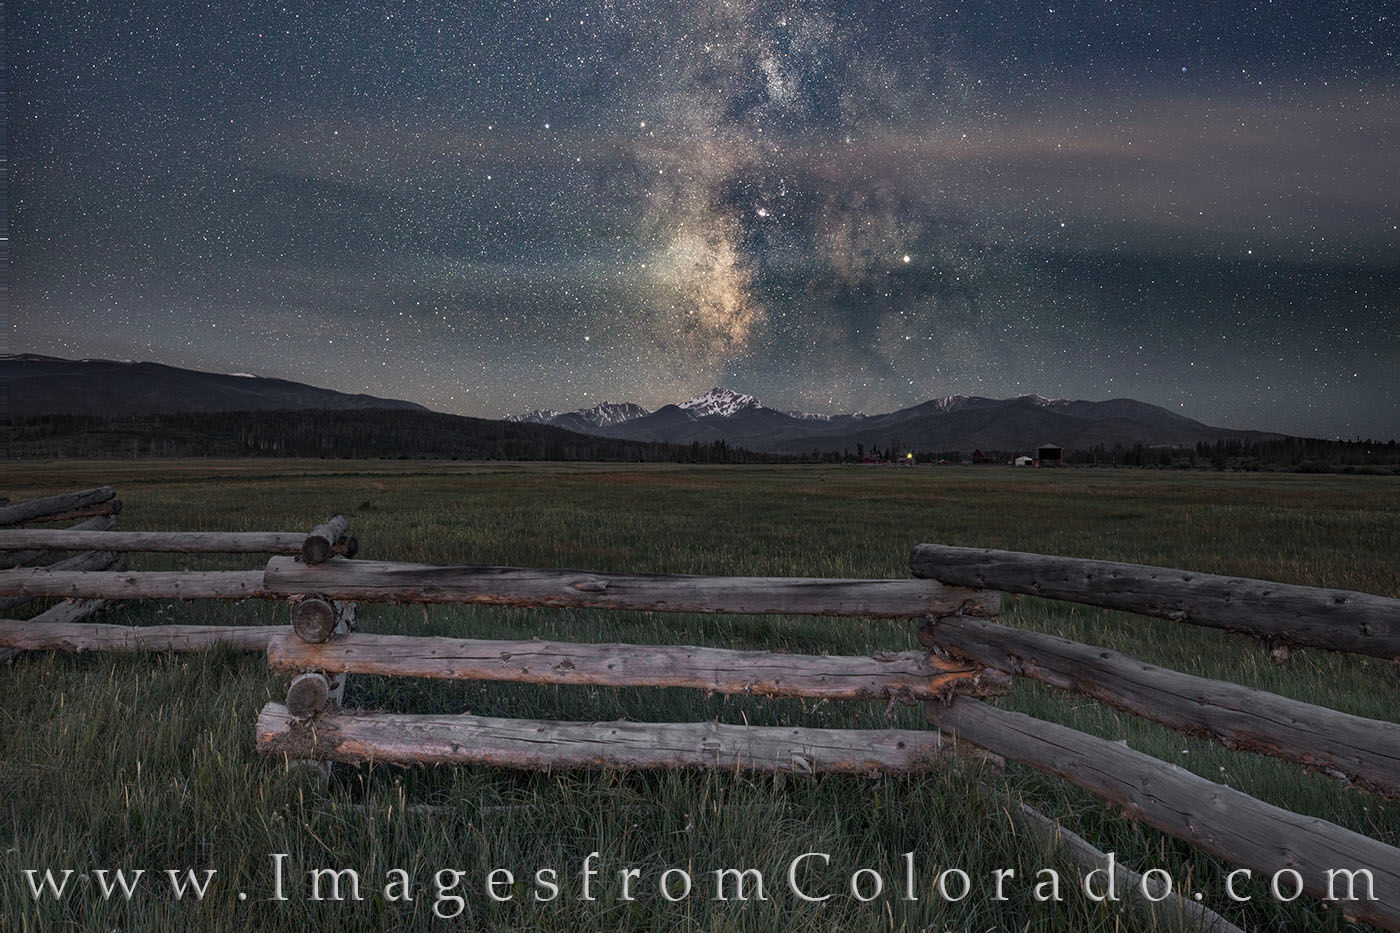 On a cold clear night in the Fraser Valley near Fraser and Winter Park, Colorado, the Milky Way rolls across the night sky. Facing...